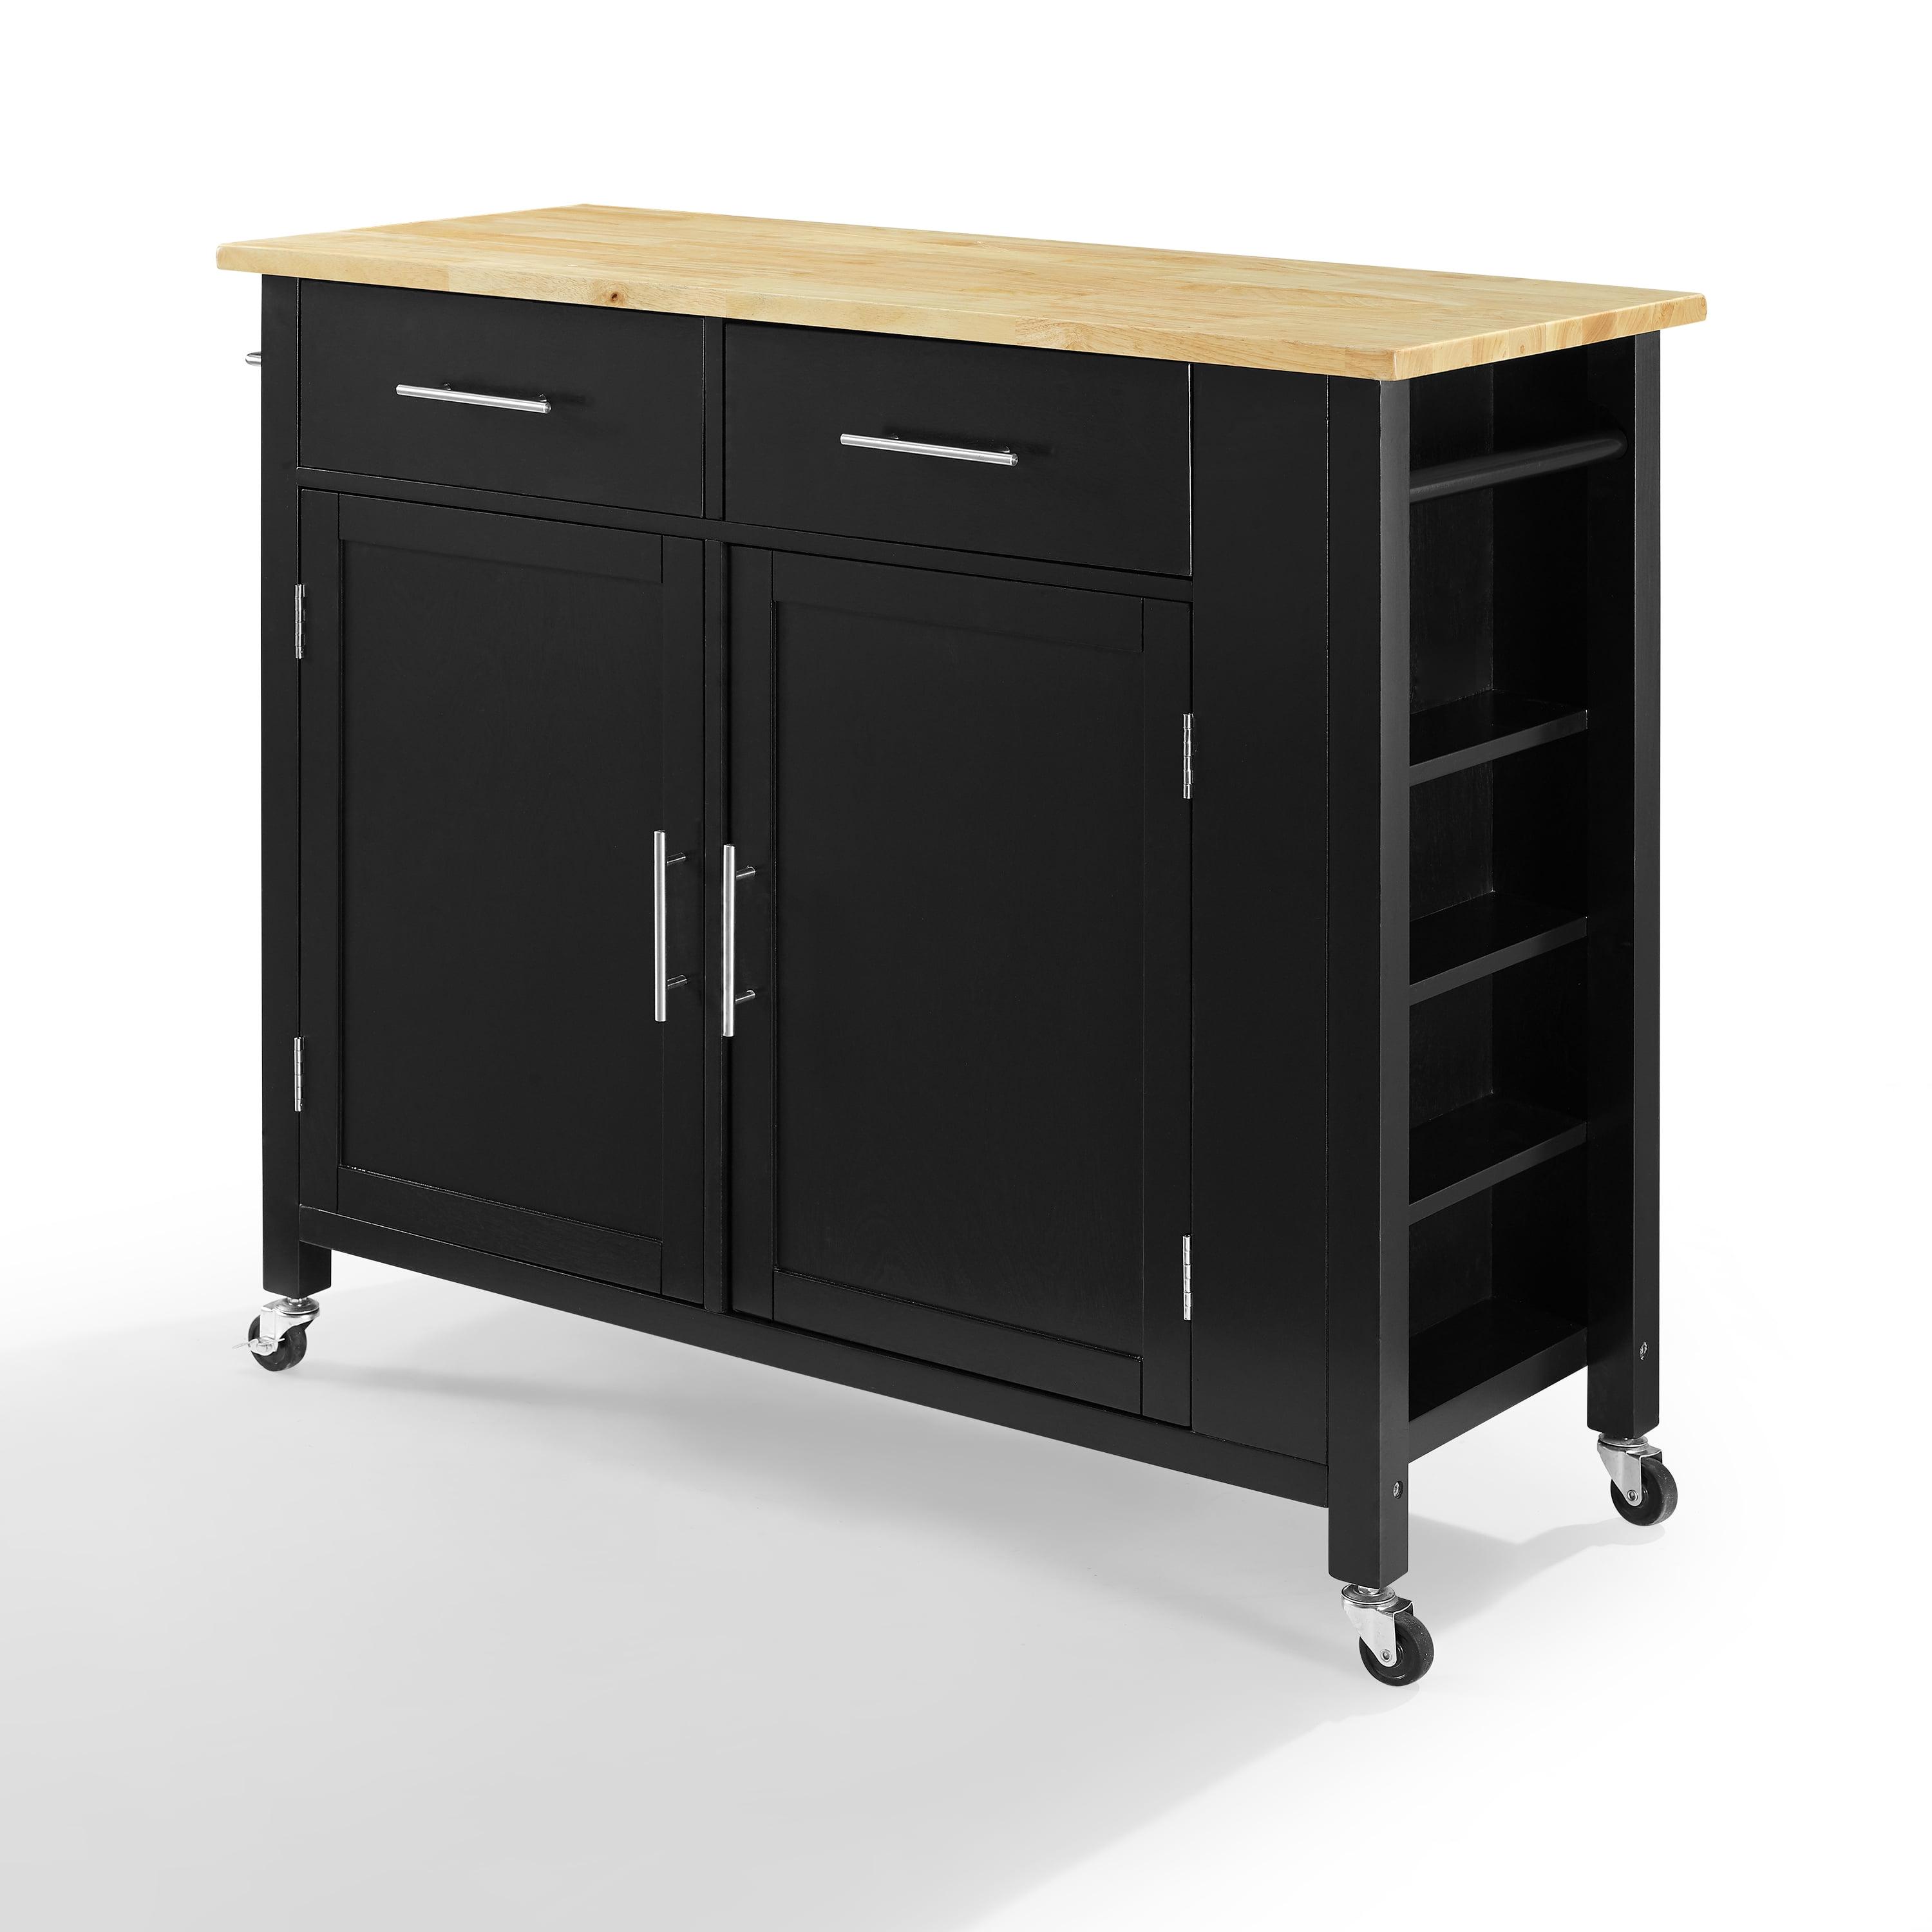 Savannah Transitional Black Wood Kitchen Cart with Spice Rack and Storage